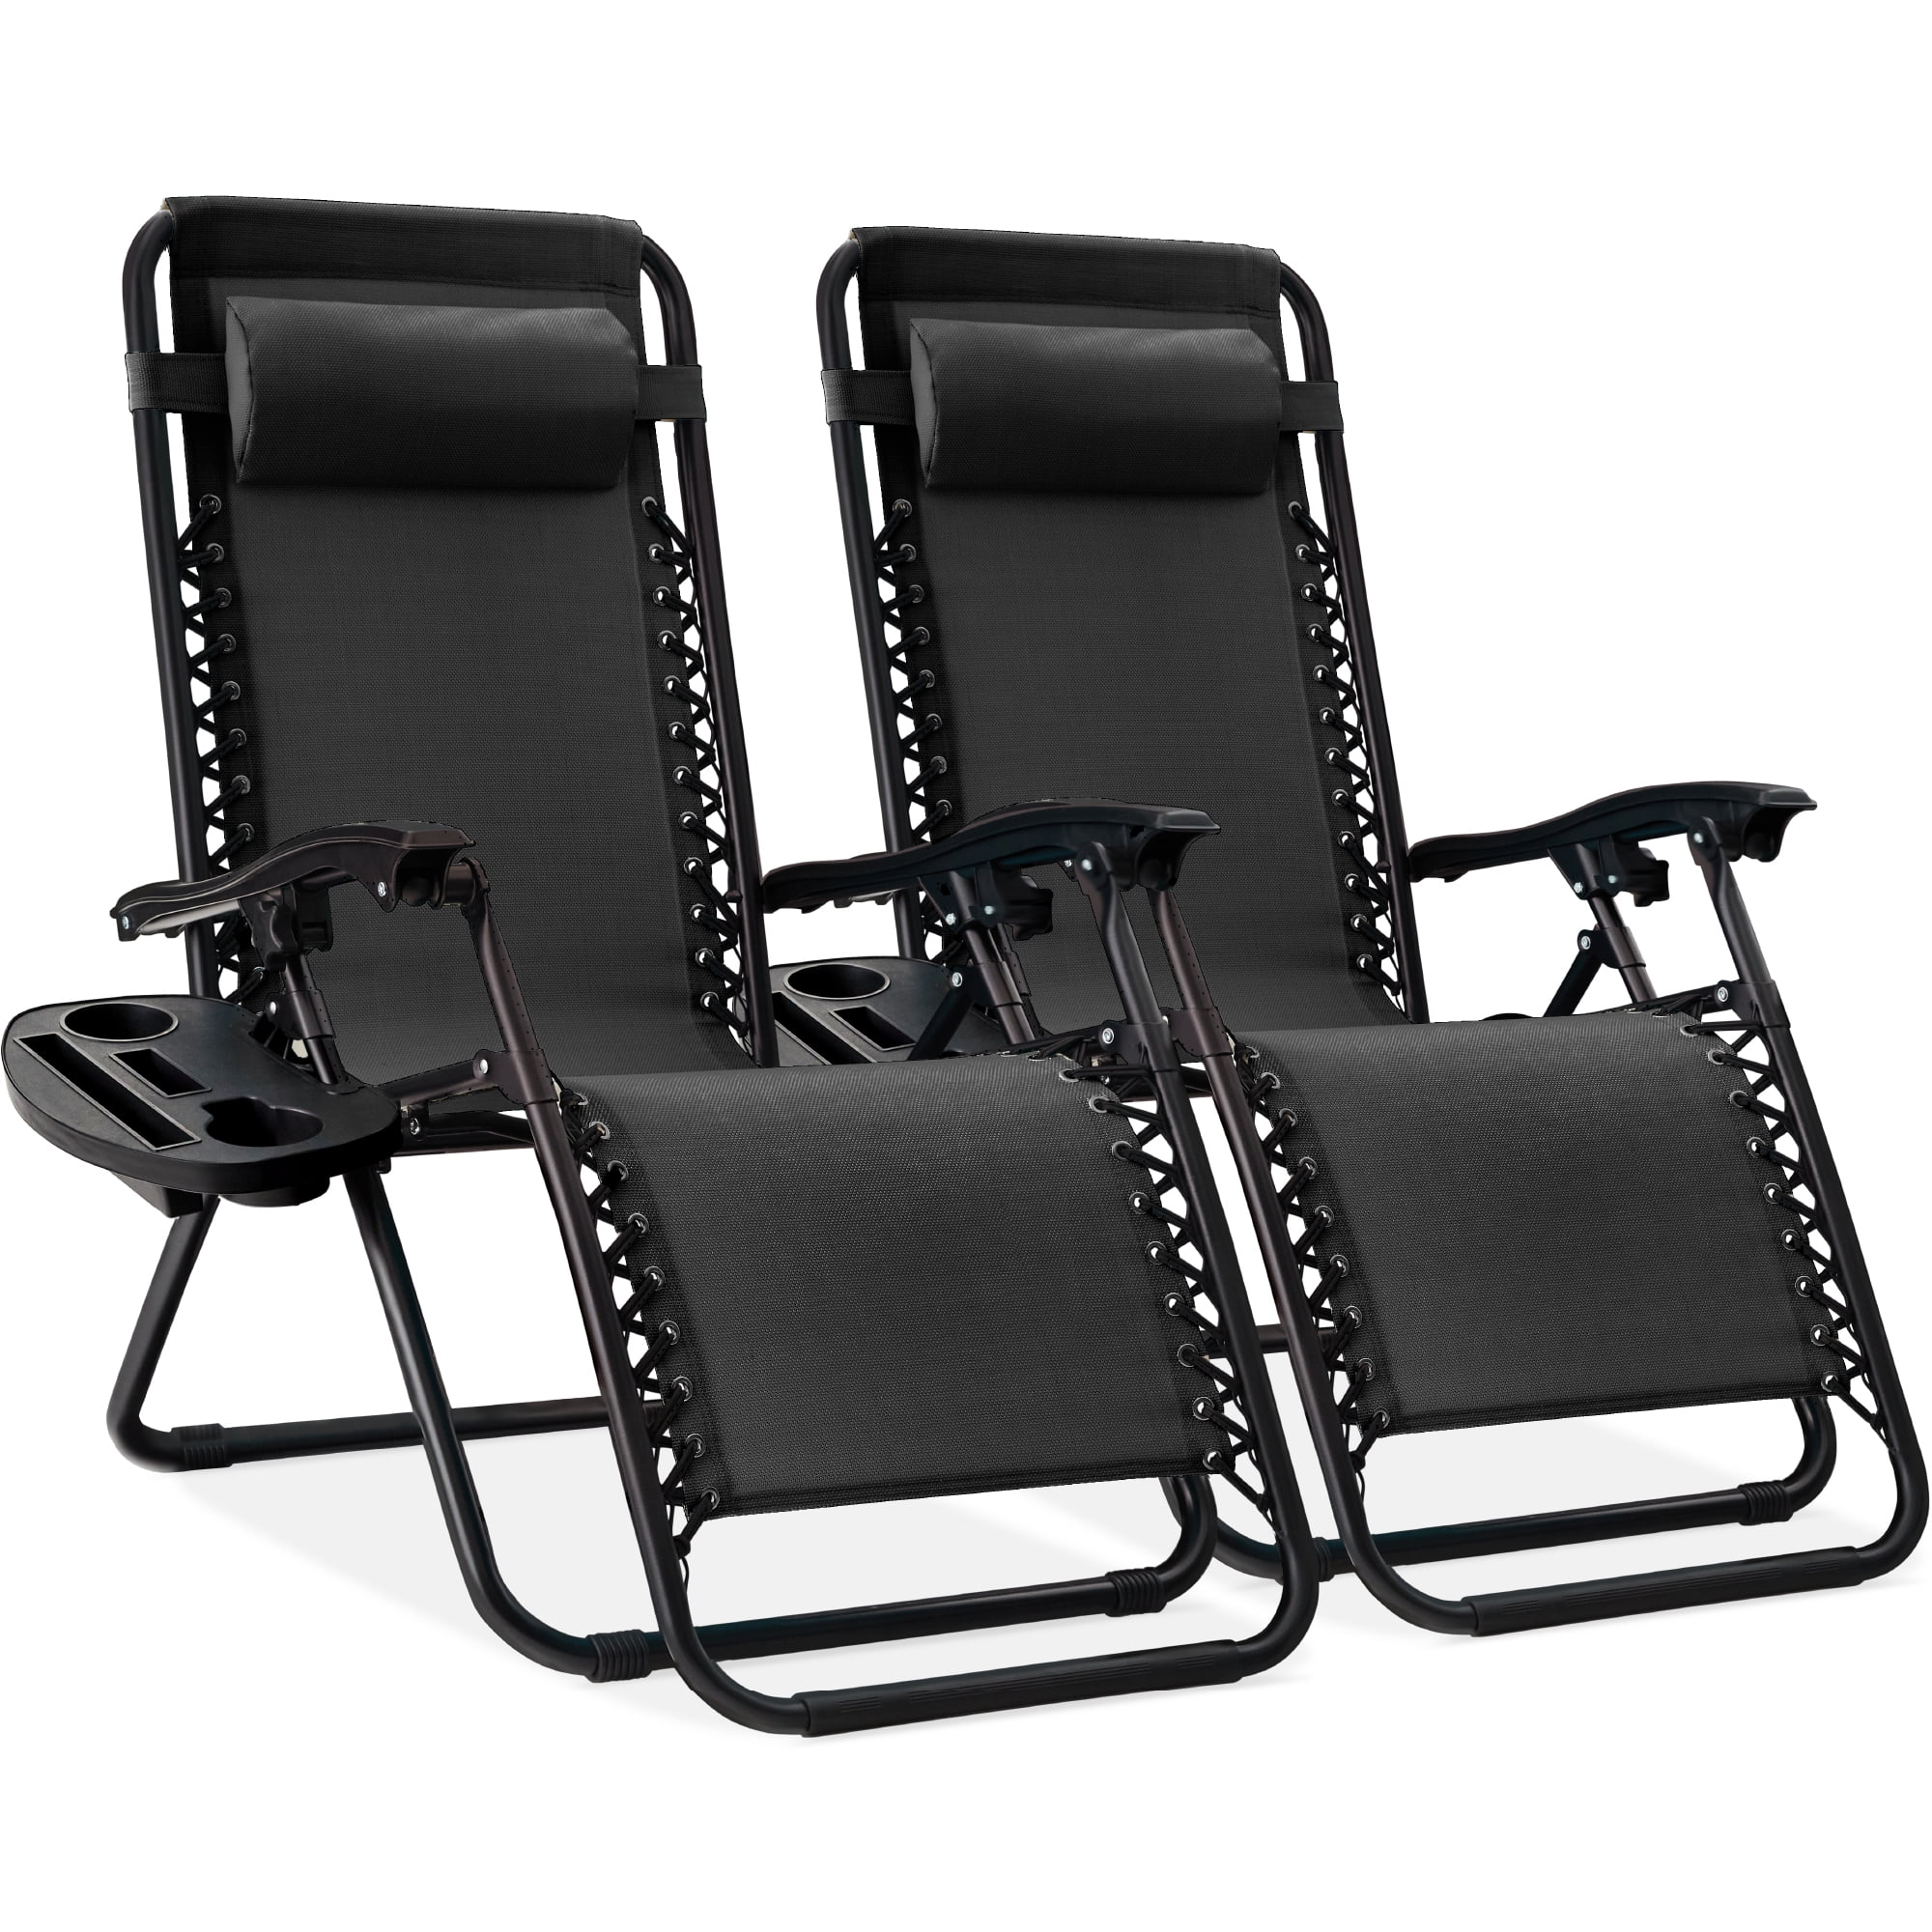 Best Choice Products Set of 2 Zero Gravity Lounge Chair Recliners for Patio, Pool w/ Cup Holder Tray - Black